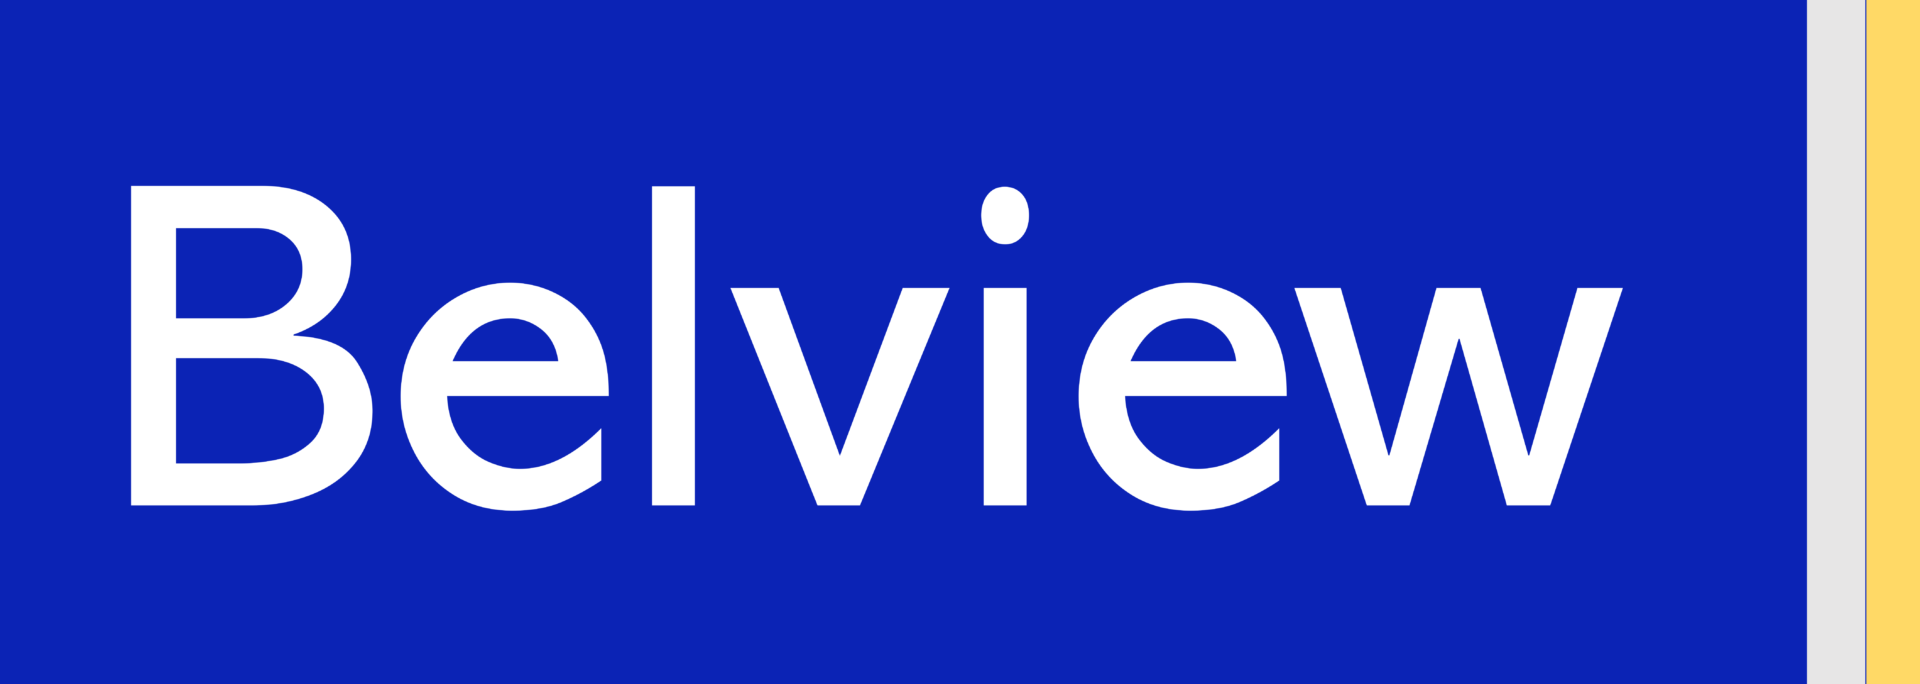 A blue and white logo for alview.